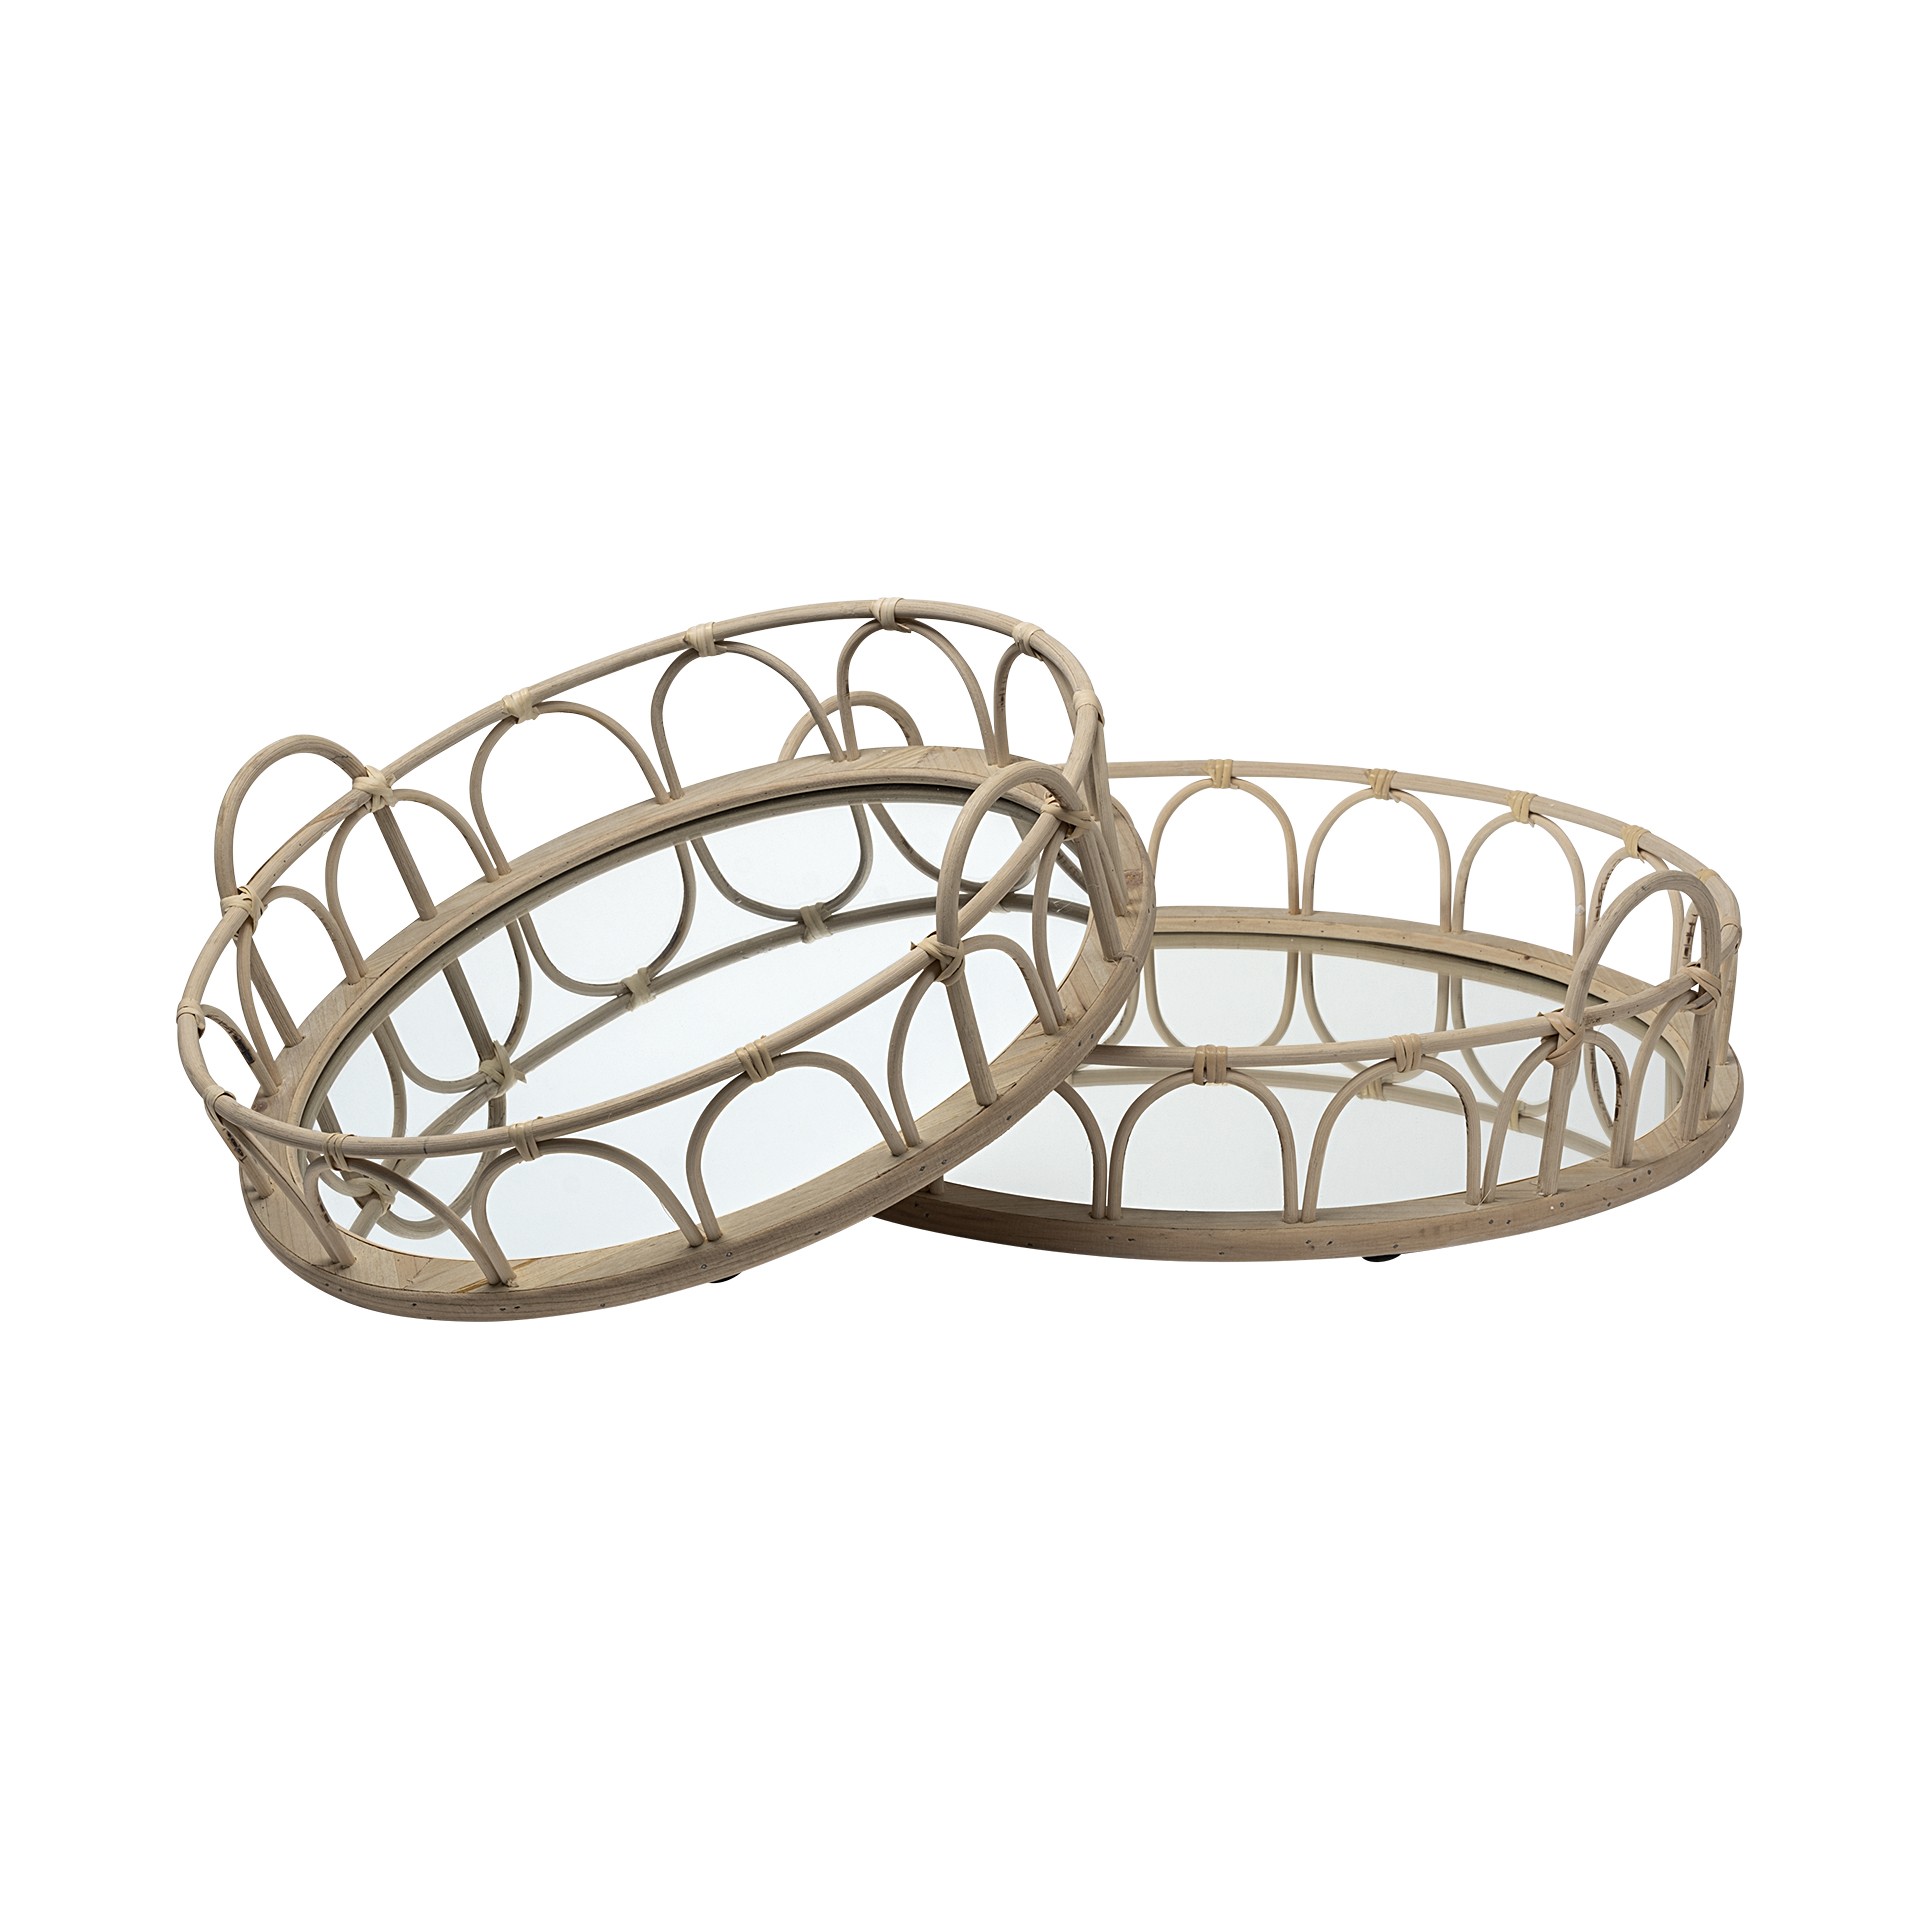 S/2 20" Natural Blonde Wood With Intricately Railings And Mirrored Glass Bottom Round Tray